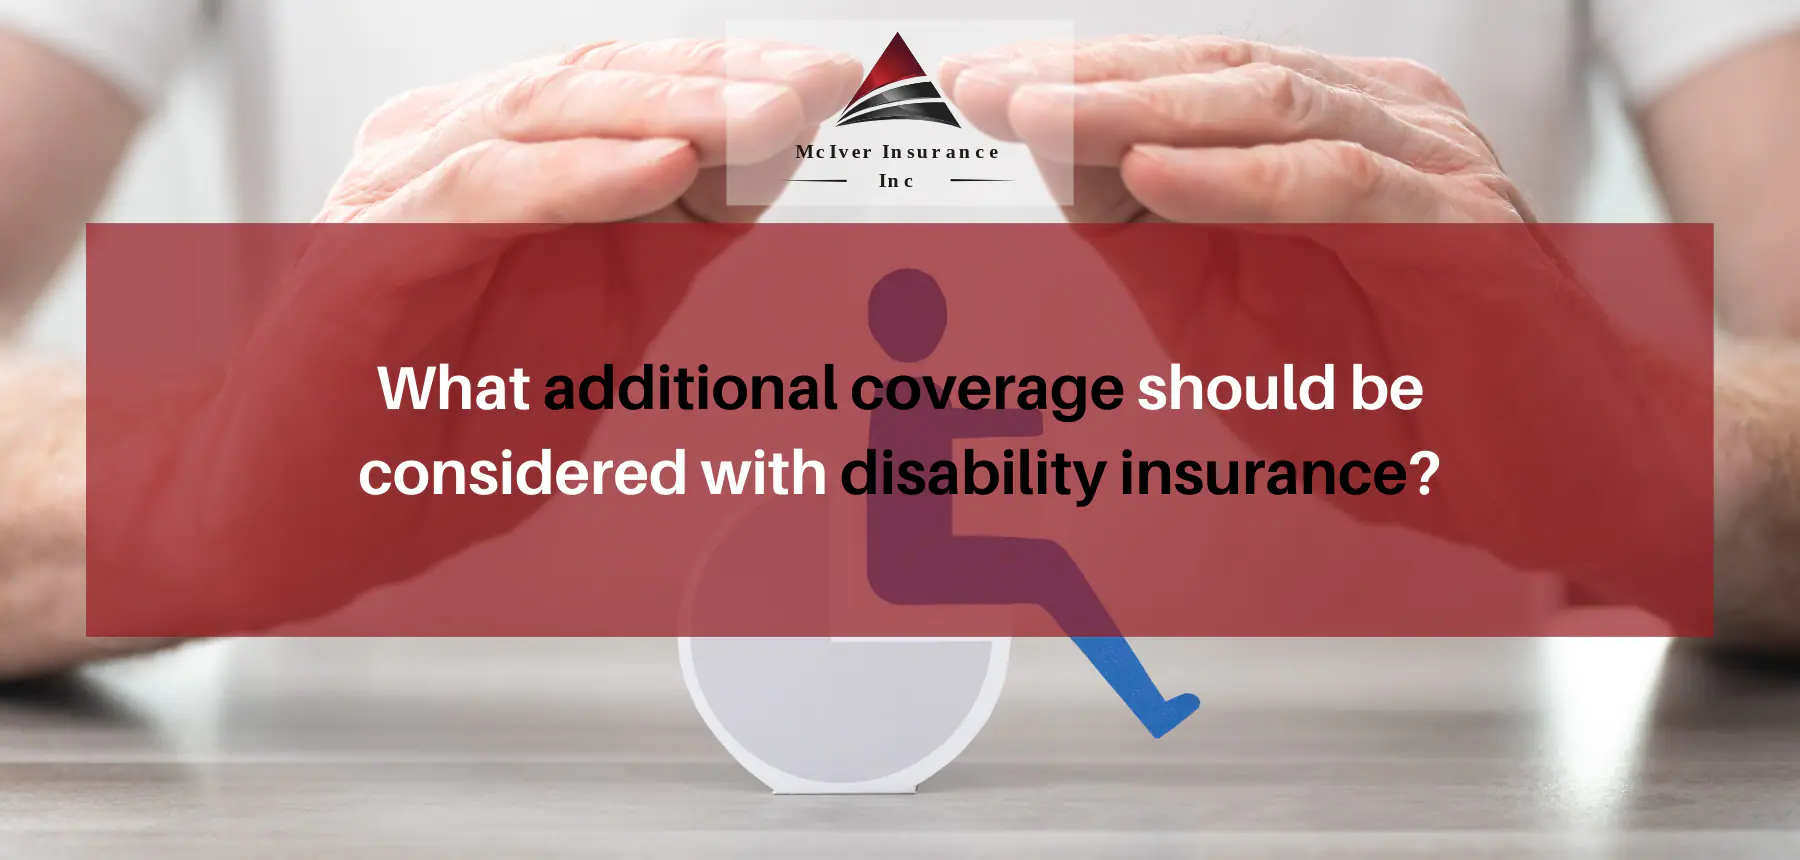 What additional coverage should be considered with disability insurance